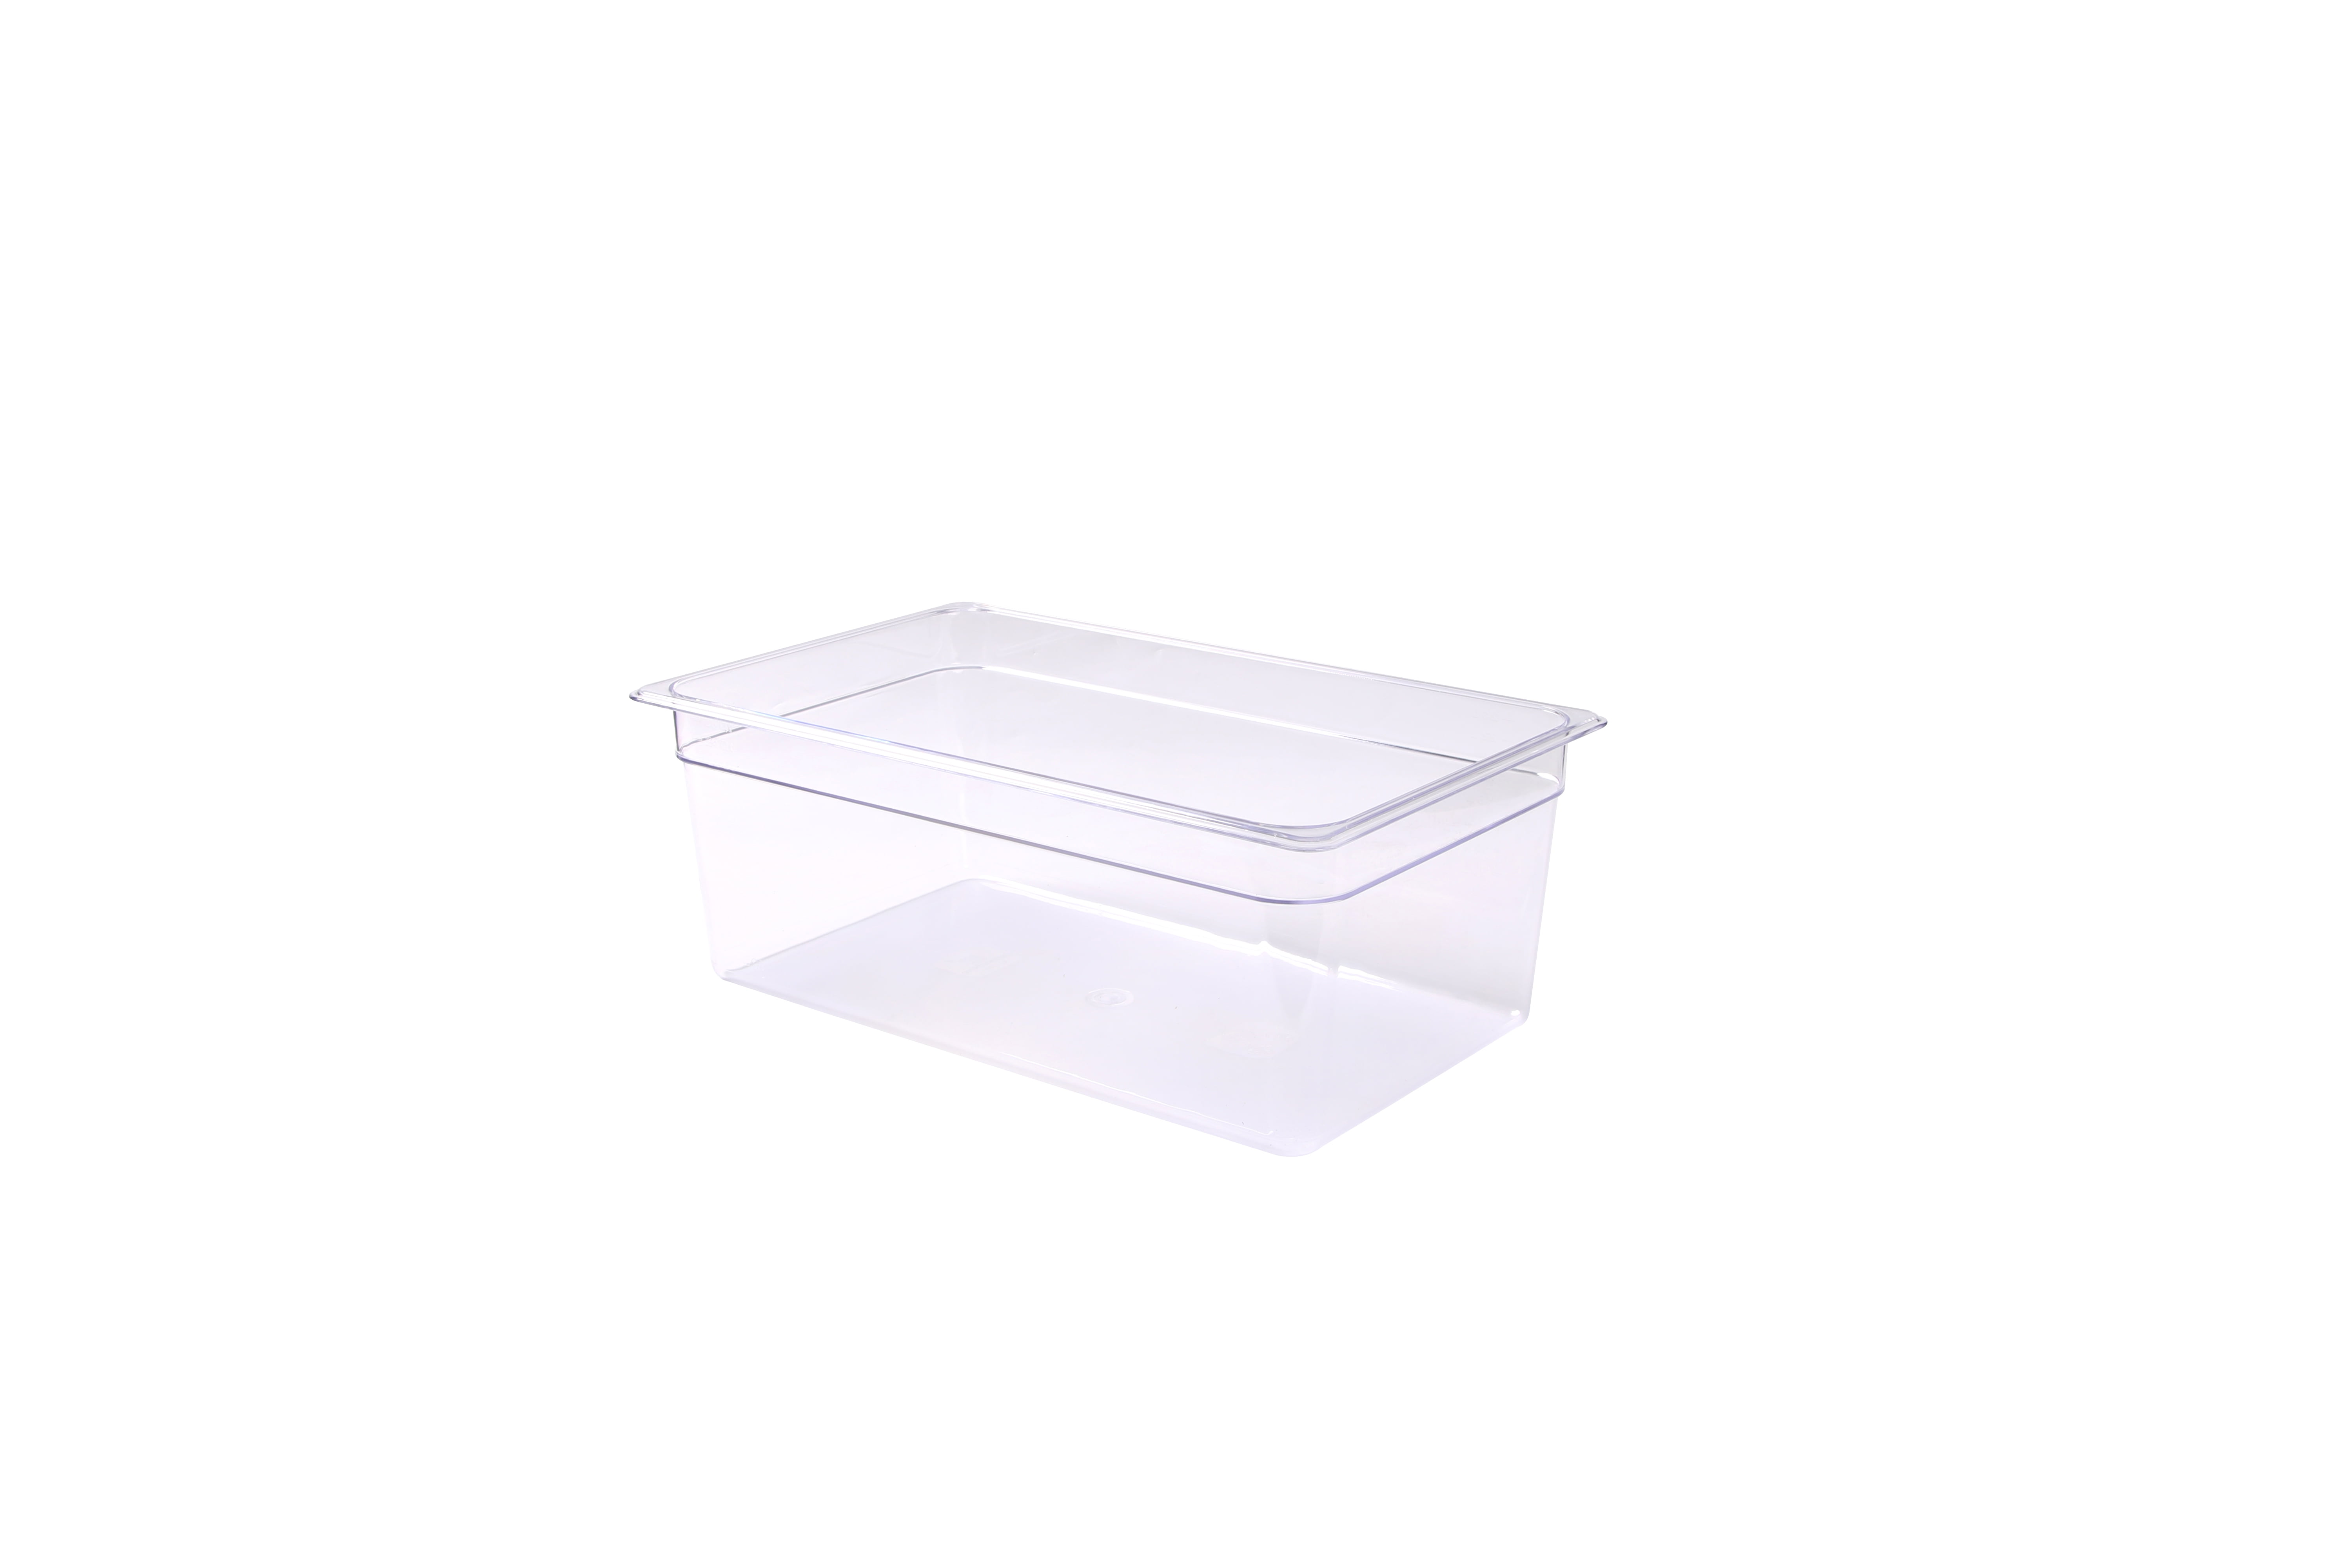 Cold Food Pan - Plastic Cold Food Storage Container - 1/2 Size - 4 inch Deep - Clear - 1ct Box - Met Lux, Size: Half Size